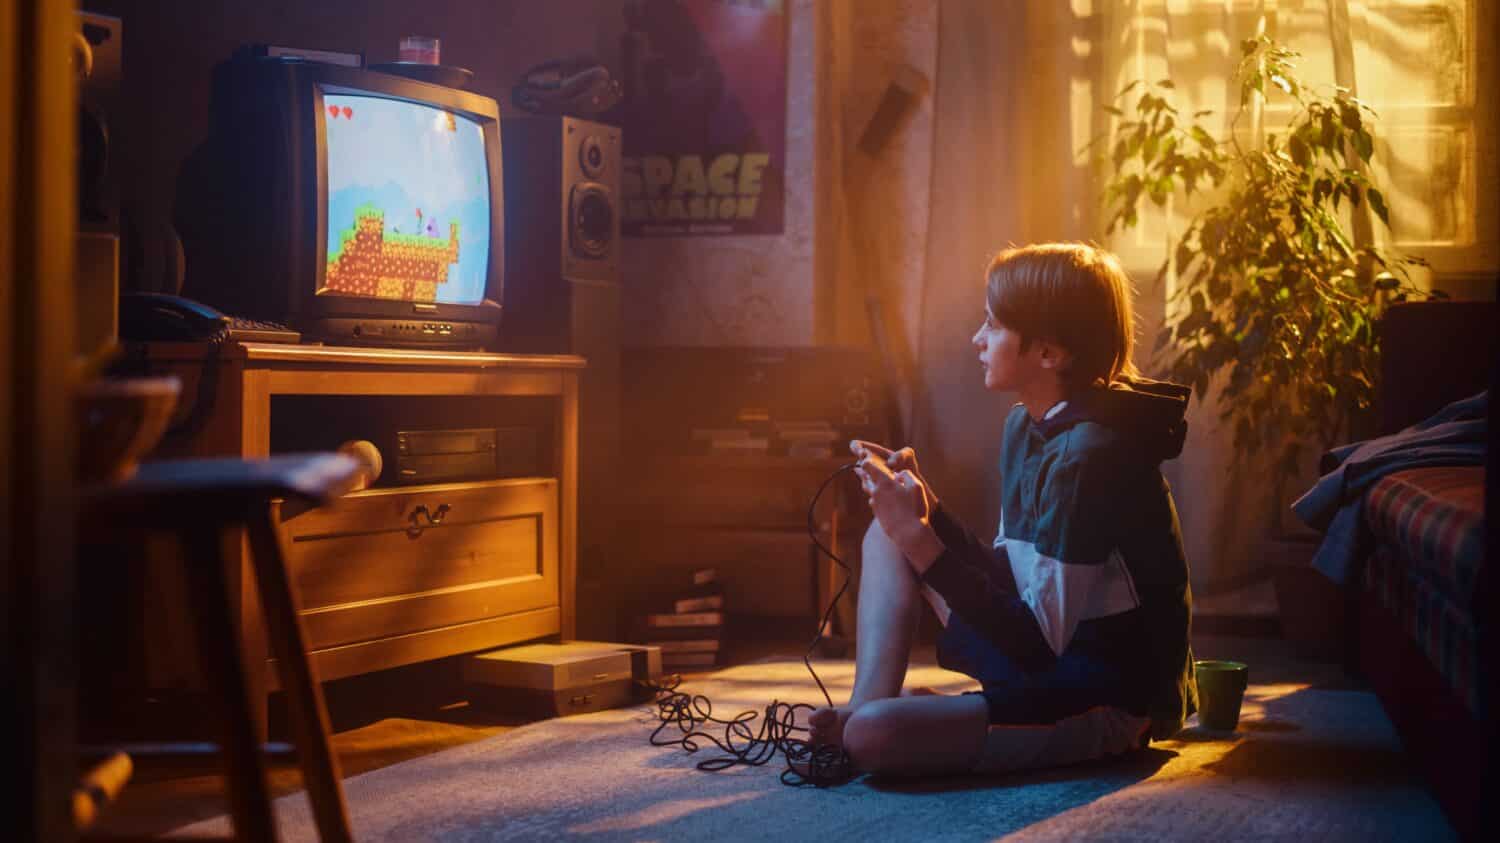 Nostalgic Retro Concept: Young Boy Playing Old-School Eighties Arcade Video Game on a Console at Home in His Room with Period-Correct Interior. Successful Kid Passes the Level and Wins.